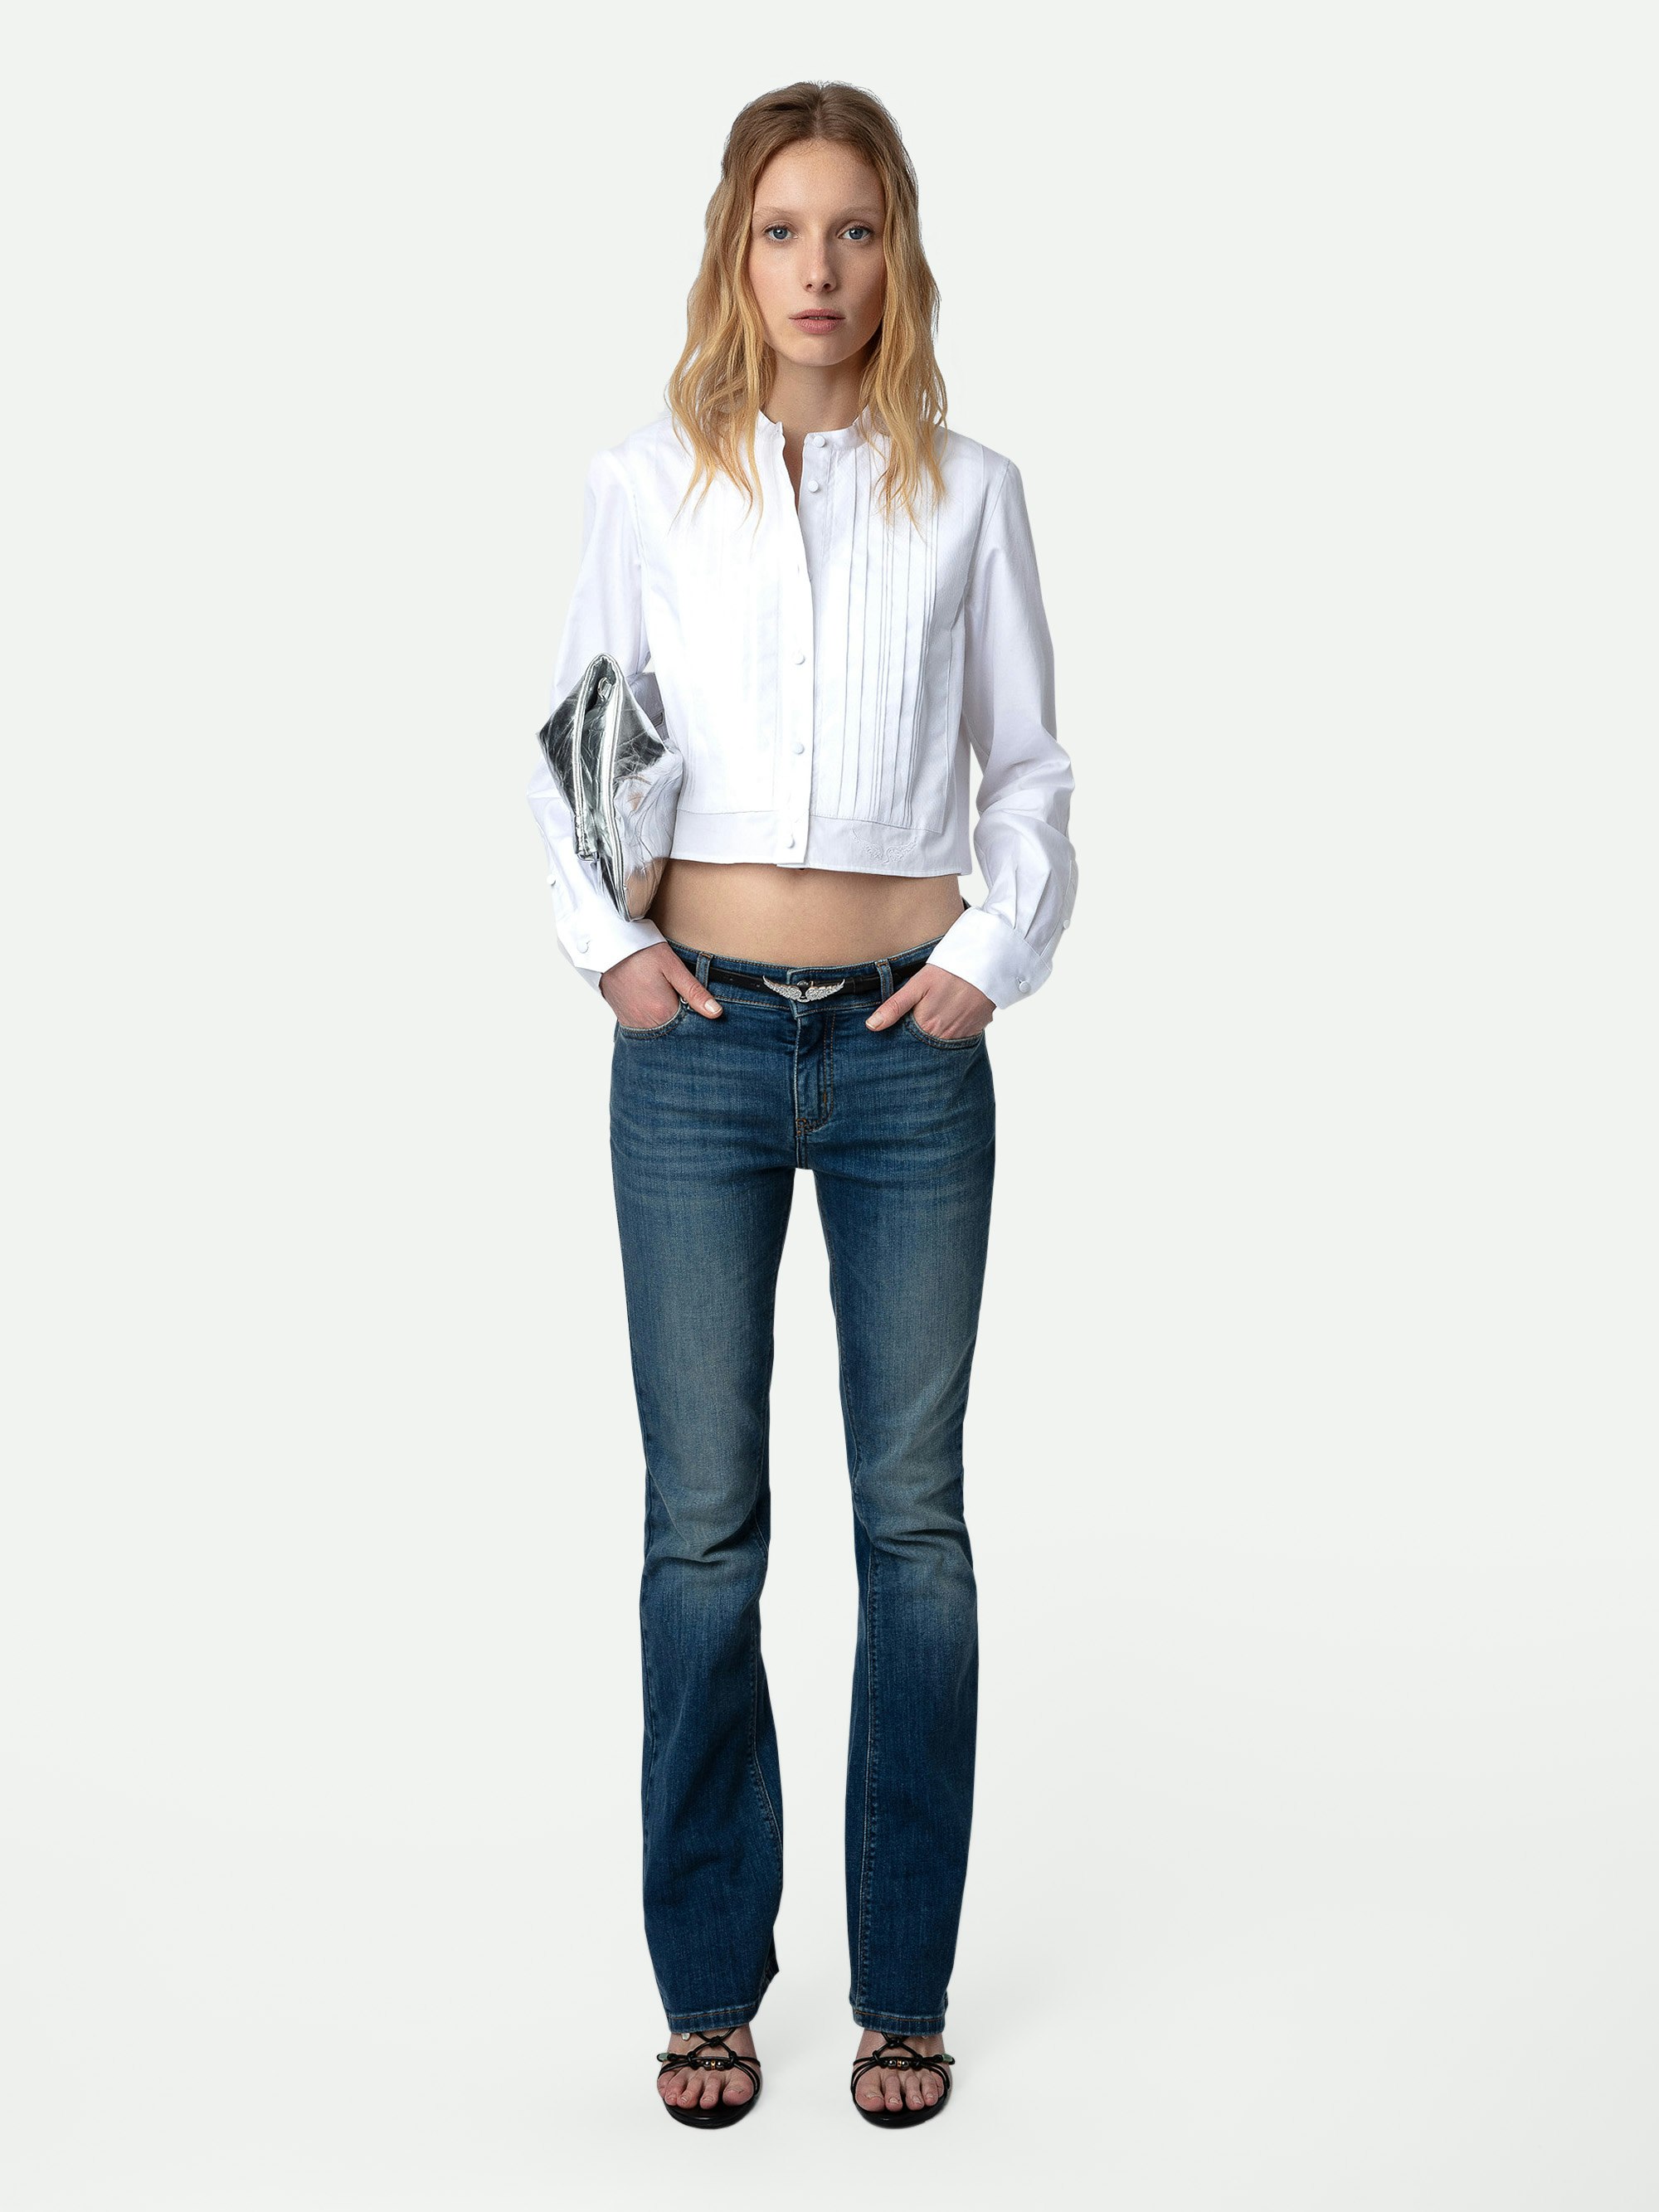 Theby Shirt - White cotton cropped shirt with wings embroidery and pleat details.